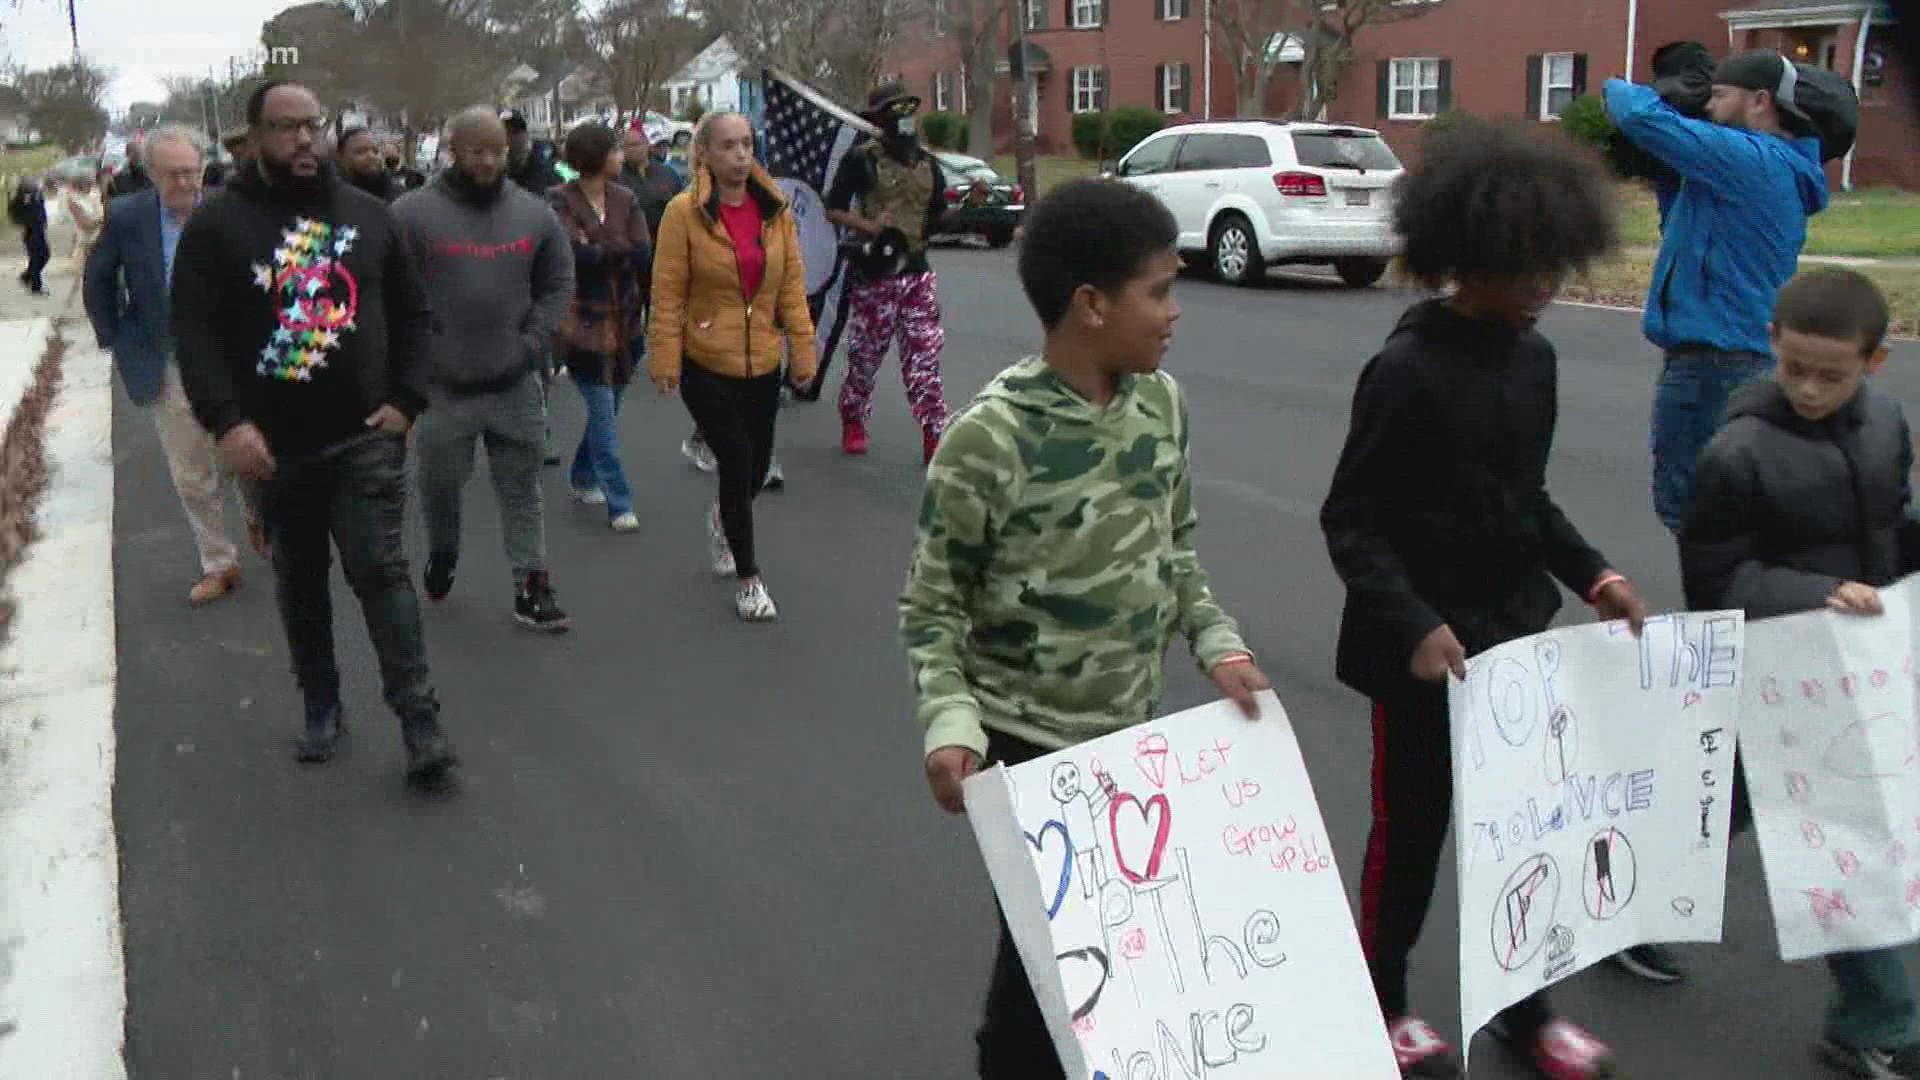 A Newport News Public Schools board member organized the march in effort to engage the community against violence.